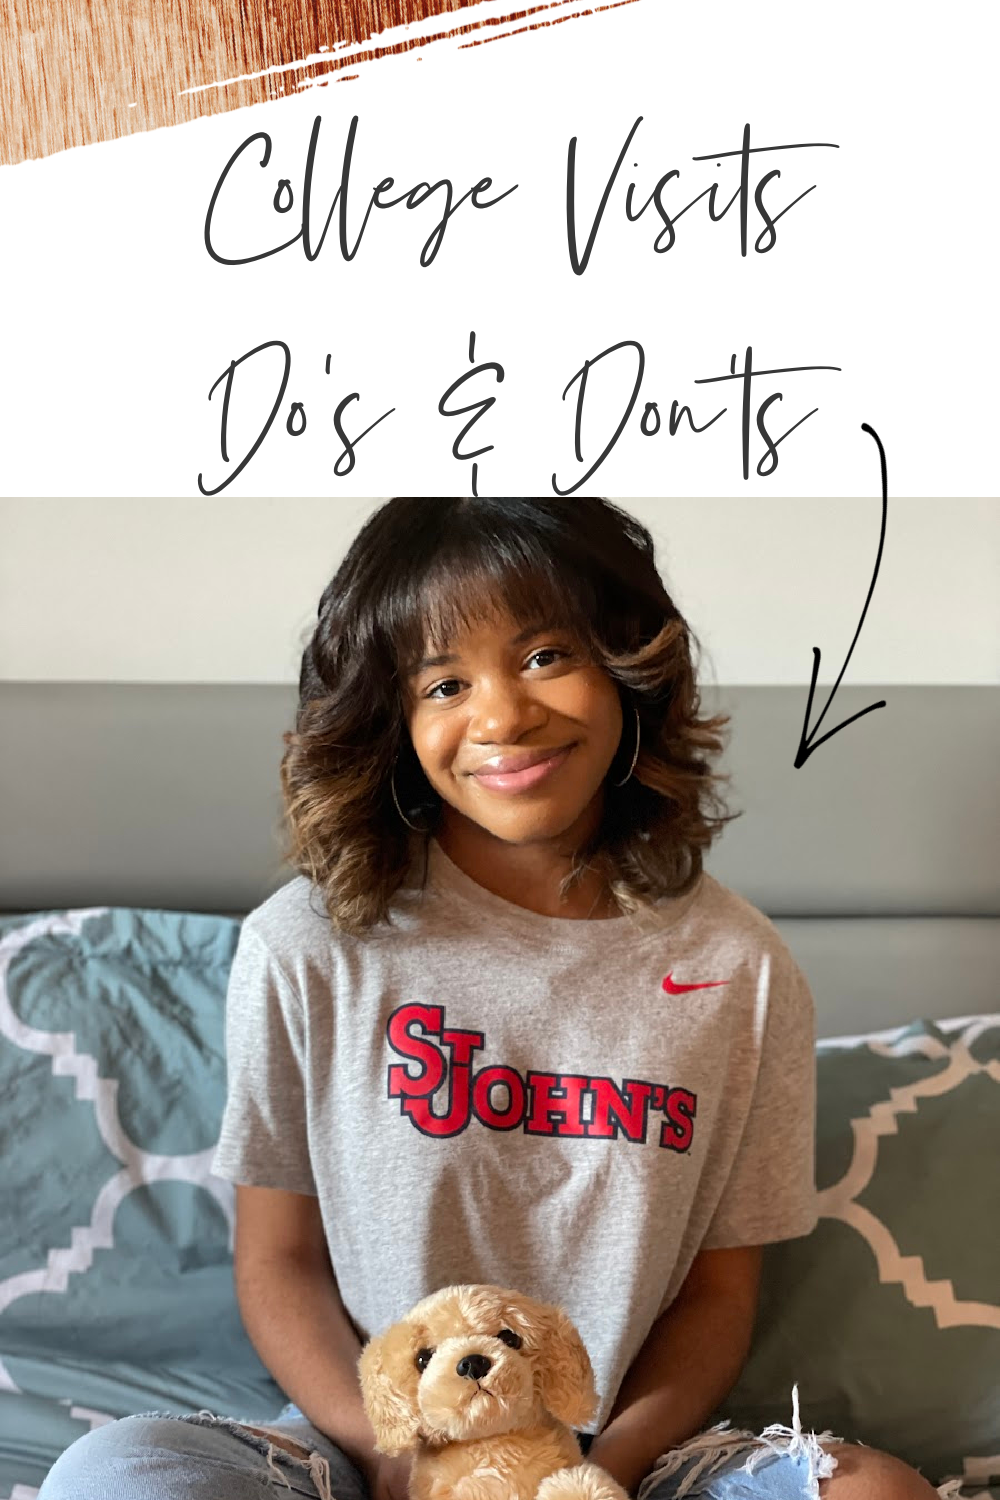 In the first in my Empty Nest Series, I am sharing my experience with college visit do's and don'ts. Read before you make the trip.